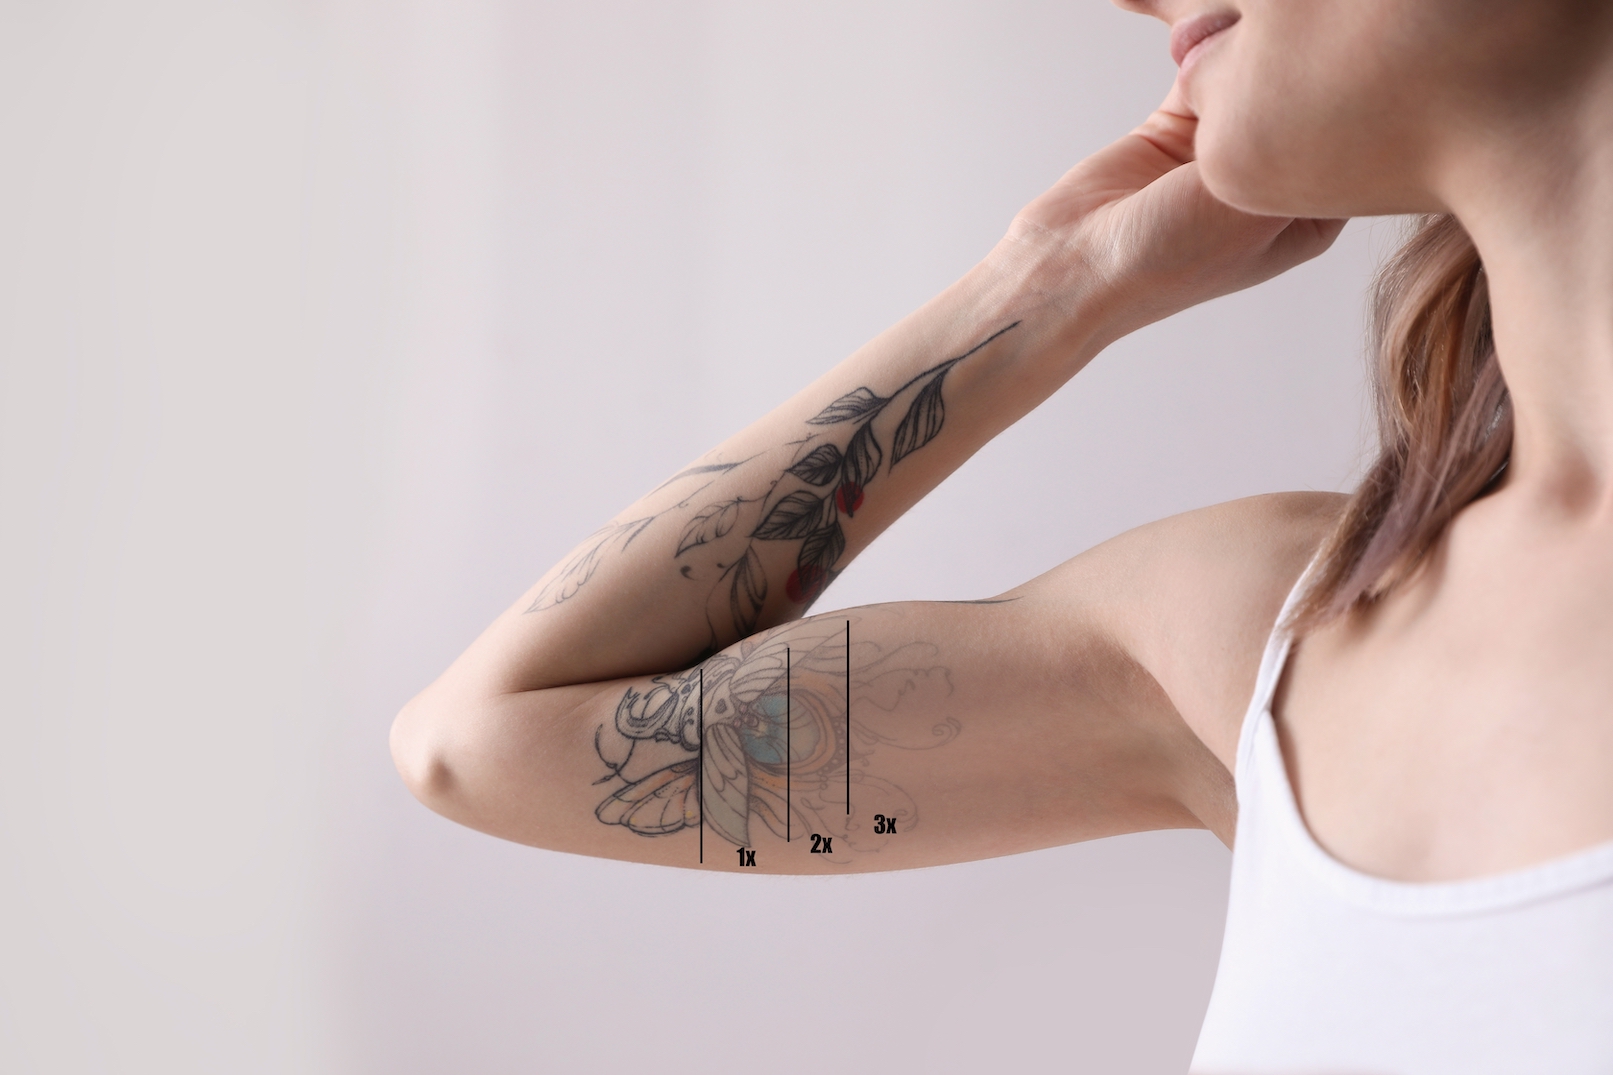 Woman before and after laser tattoo removal procedures on light background, closeup